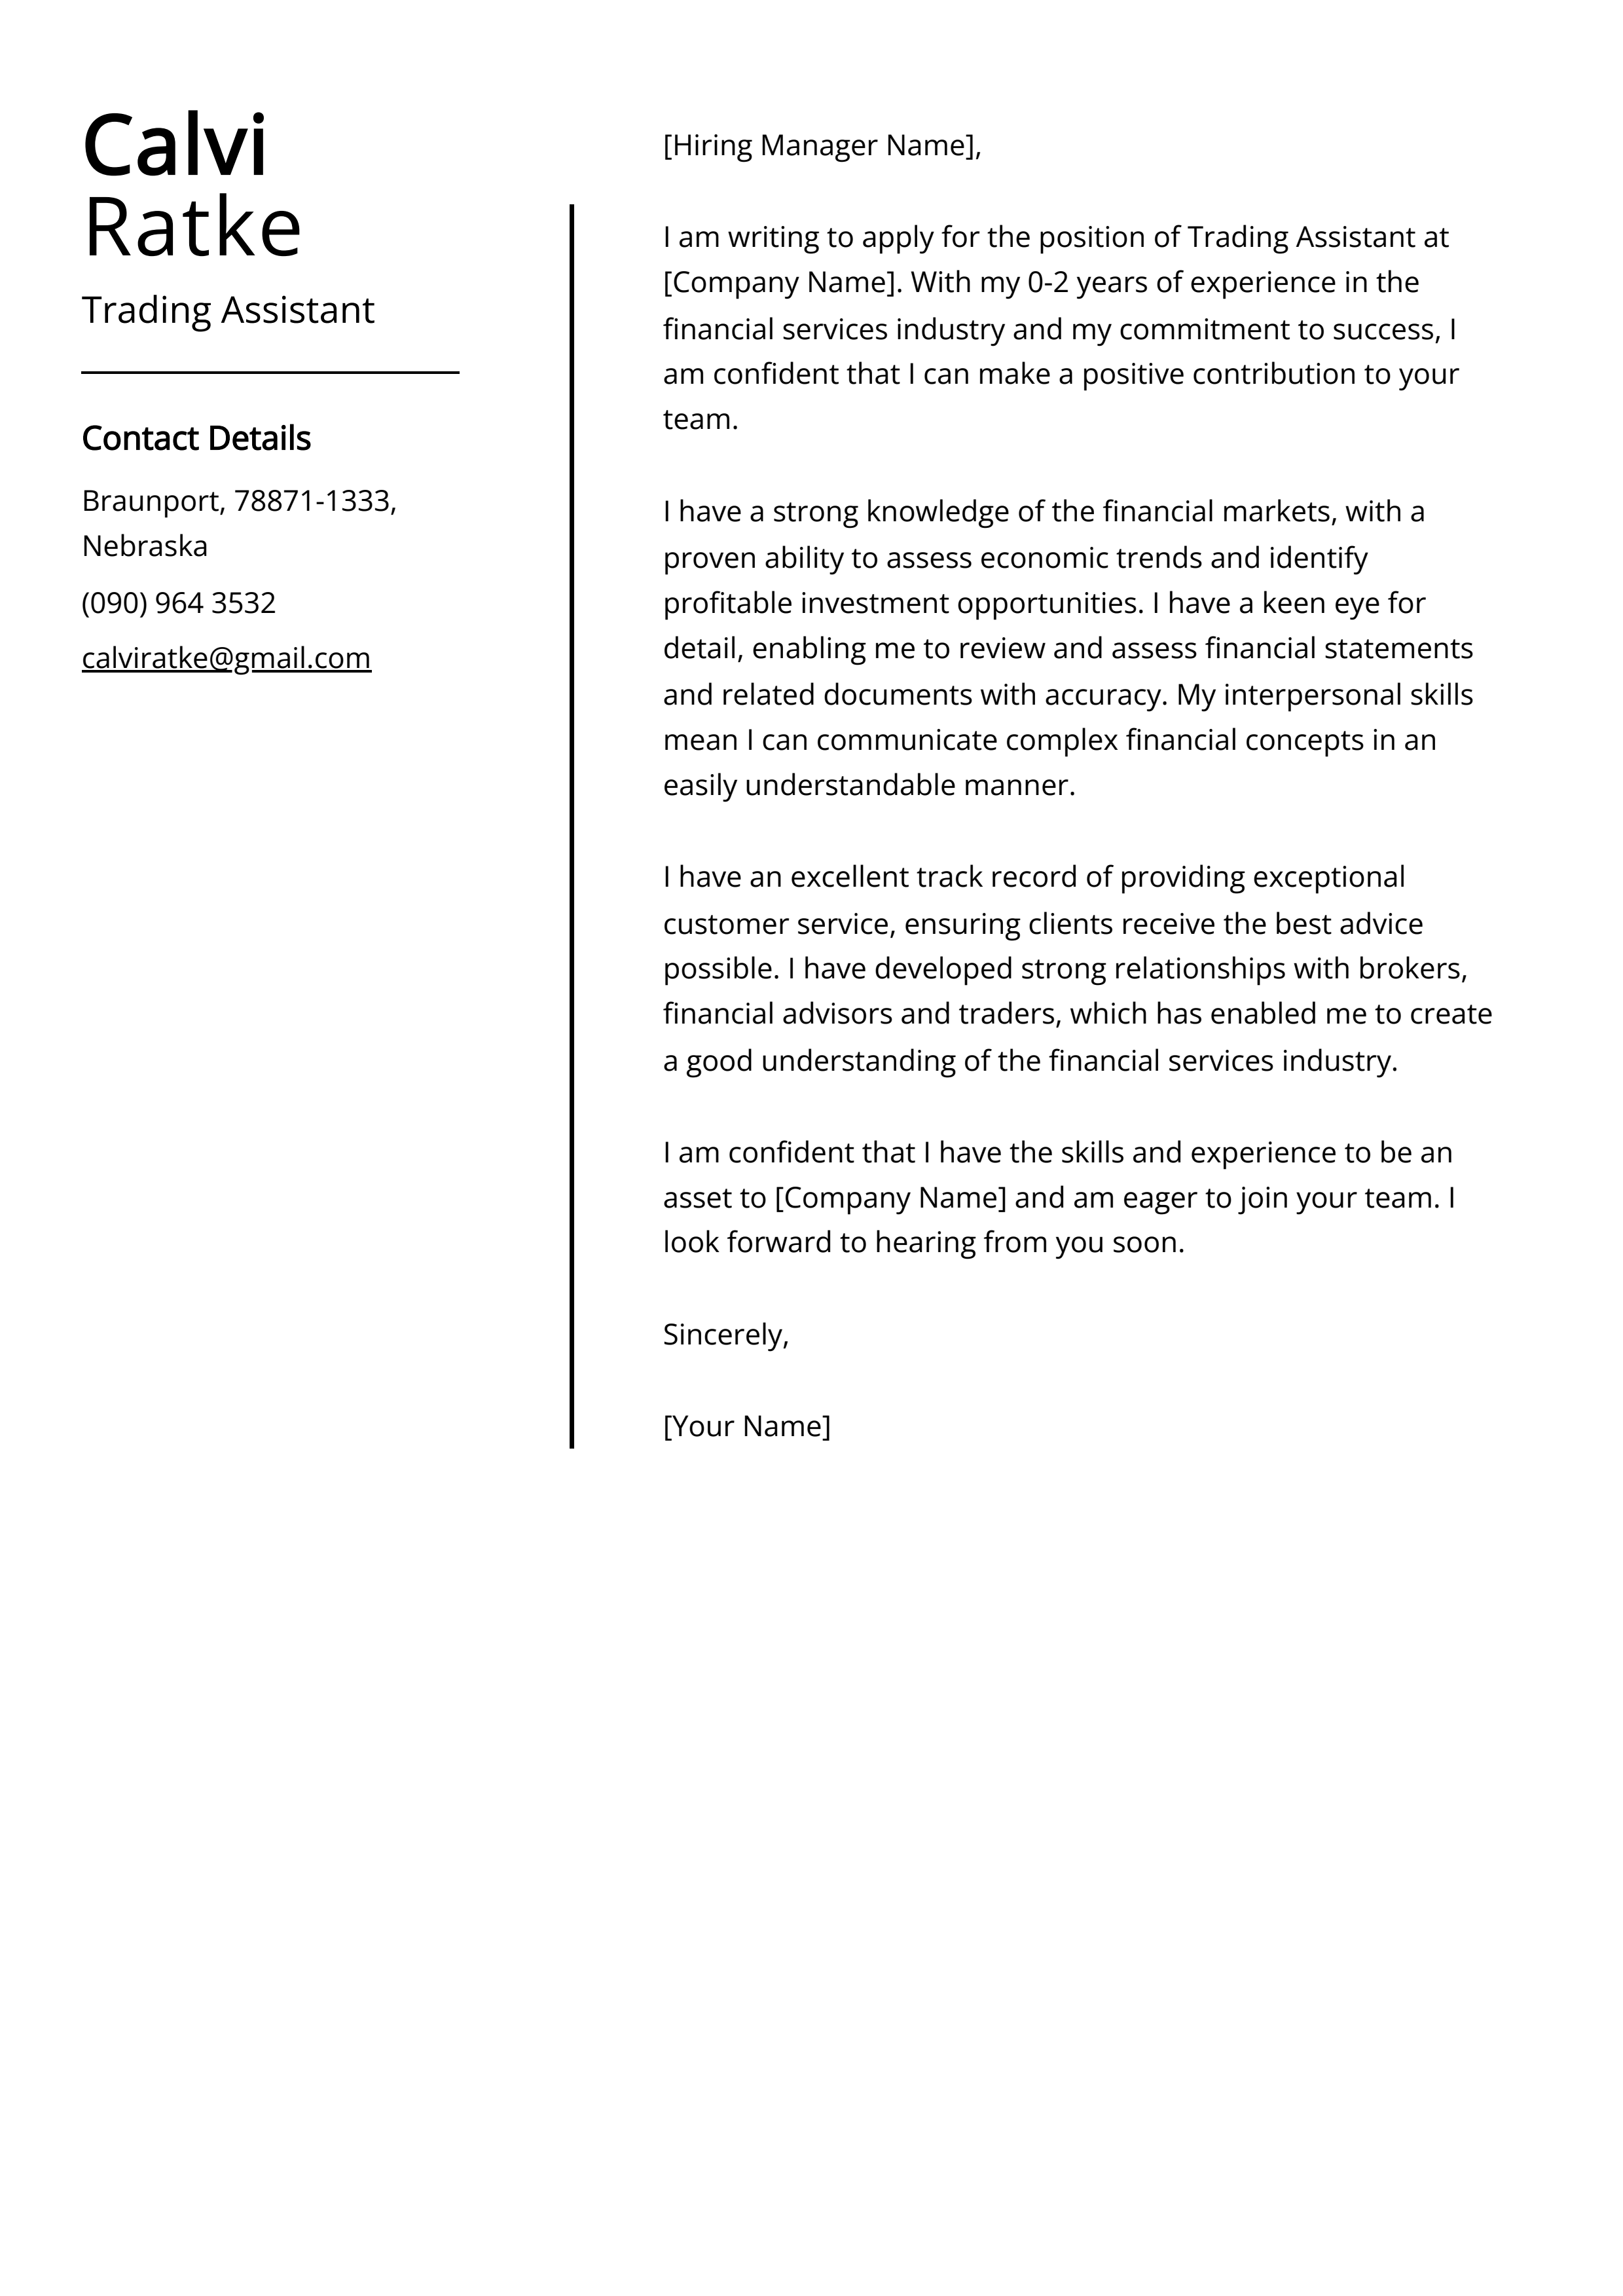 Trading Assistant Cover Letter Example